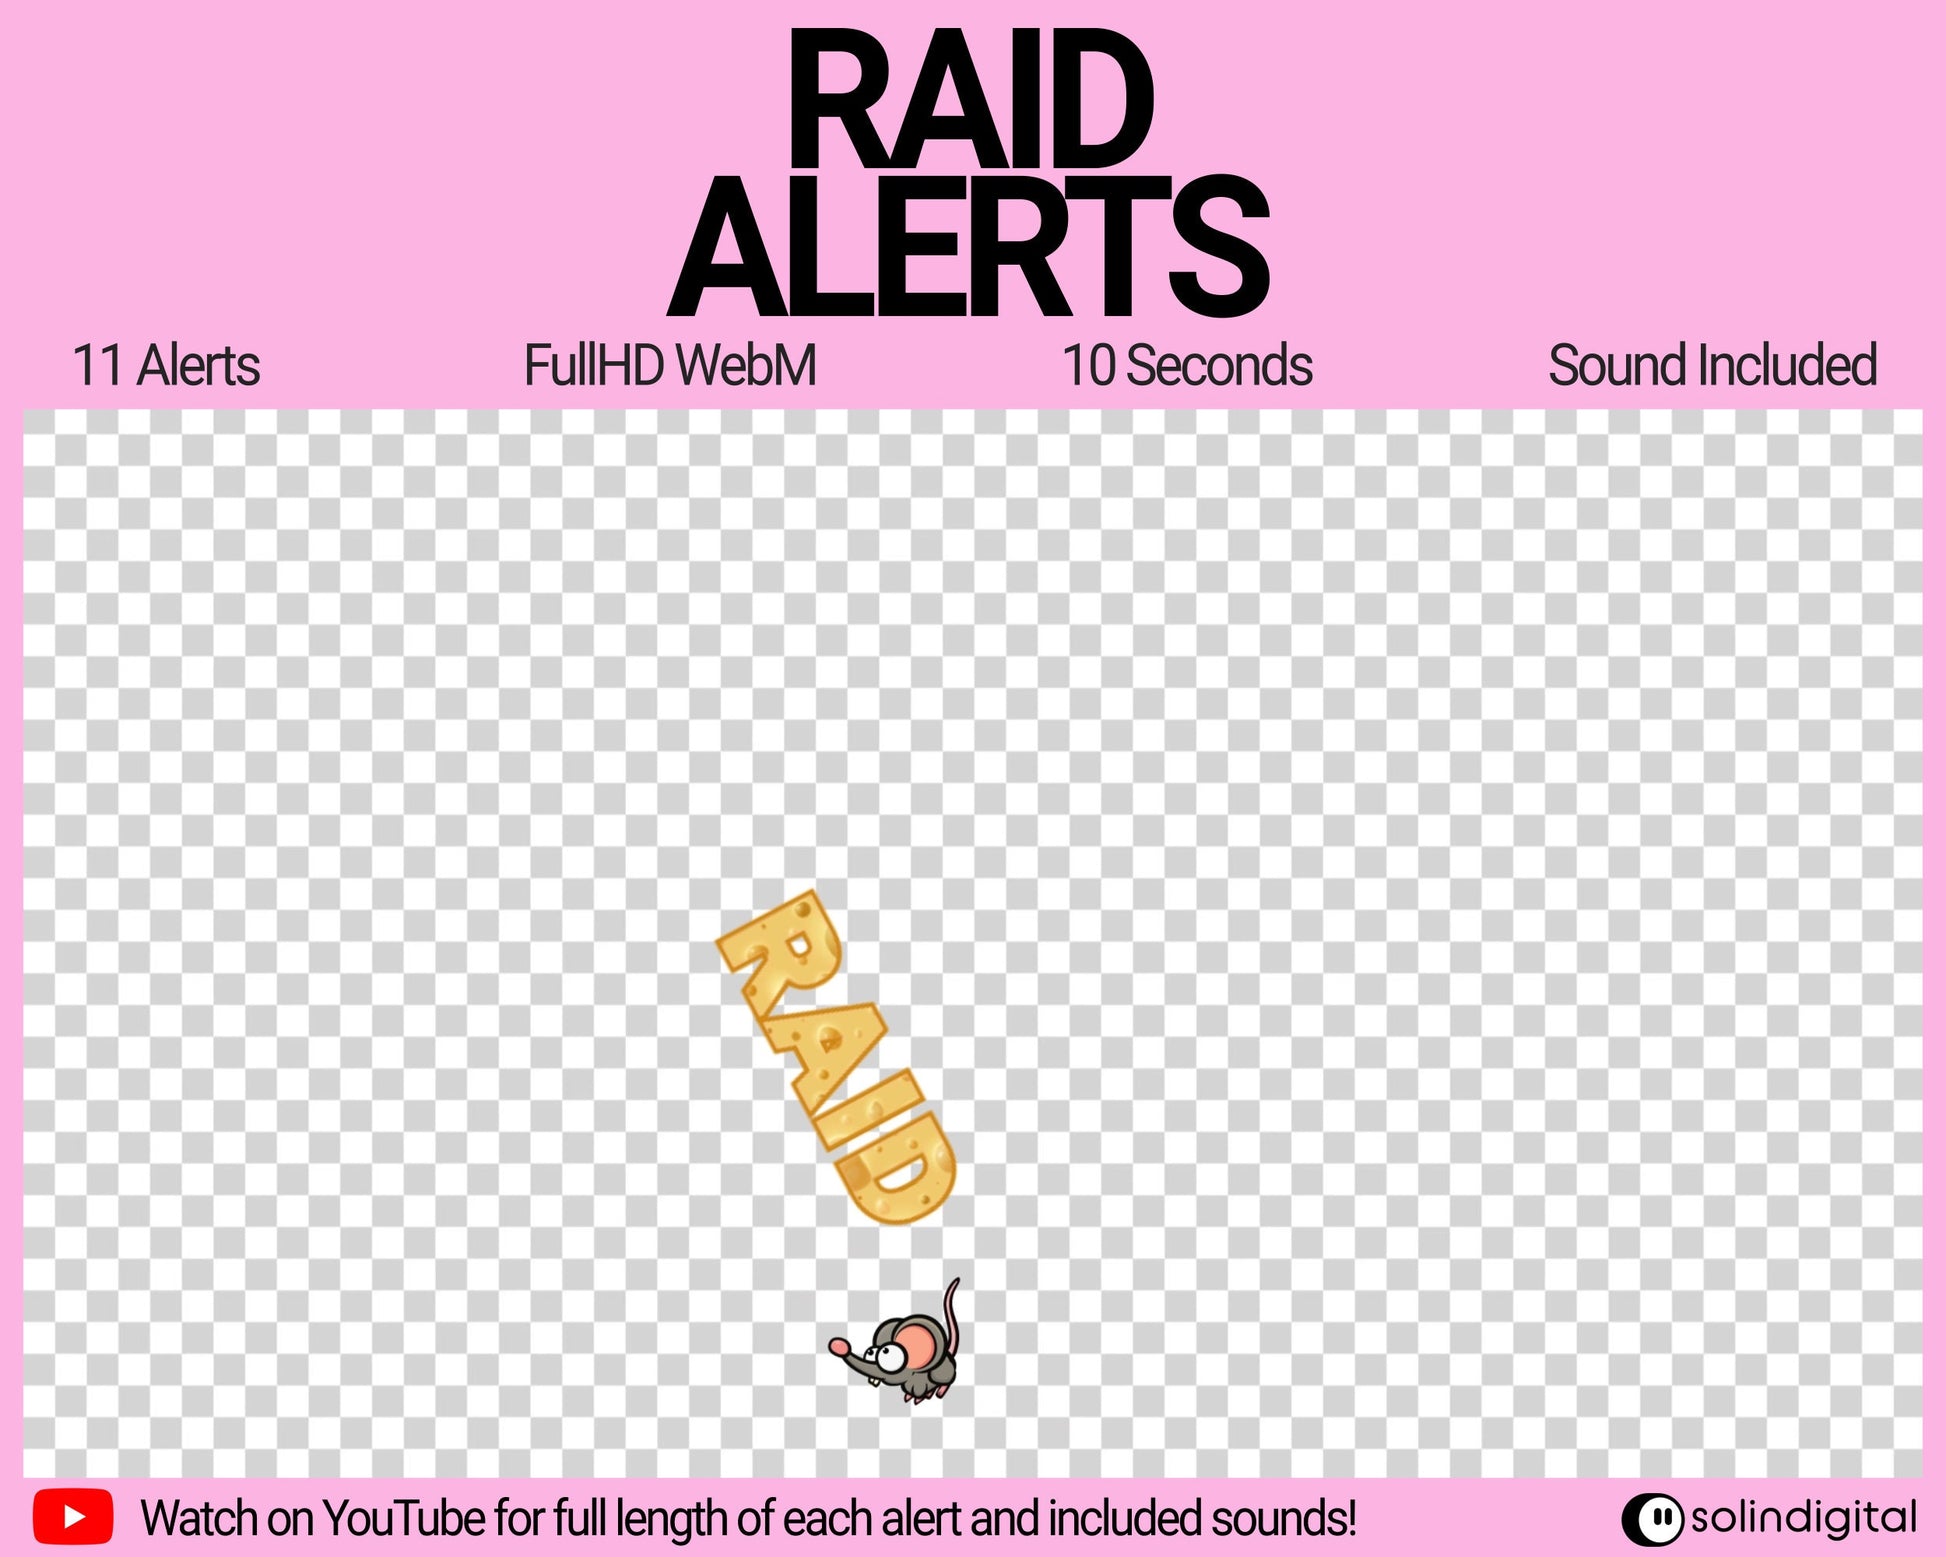 Cats Raid Alerts for Twitch Streamers, Chibi Cute Kawaii Funny Kittens Animated Stream Overlay for Twitch, YouTube, Facebook and Kick